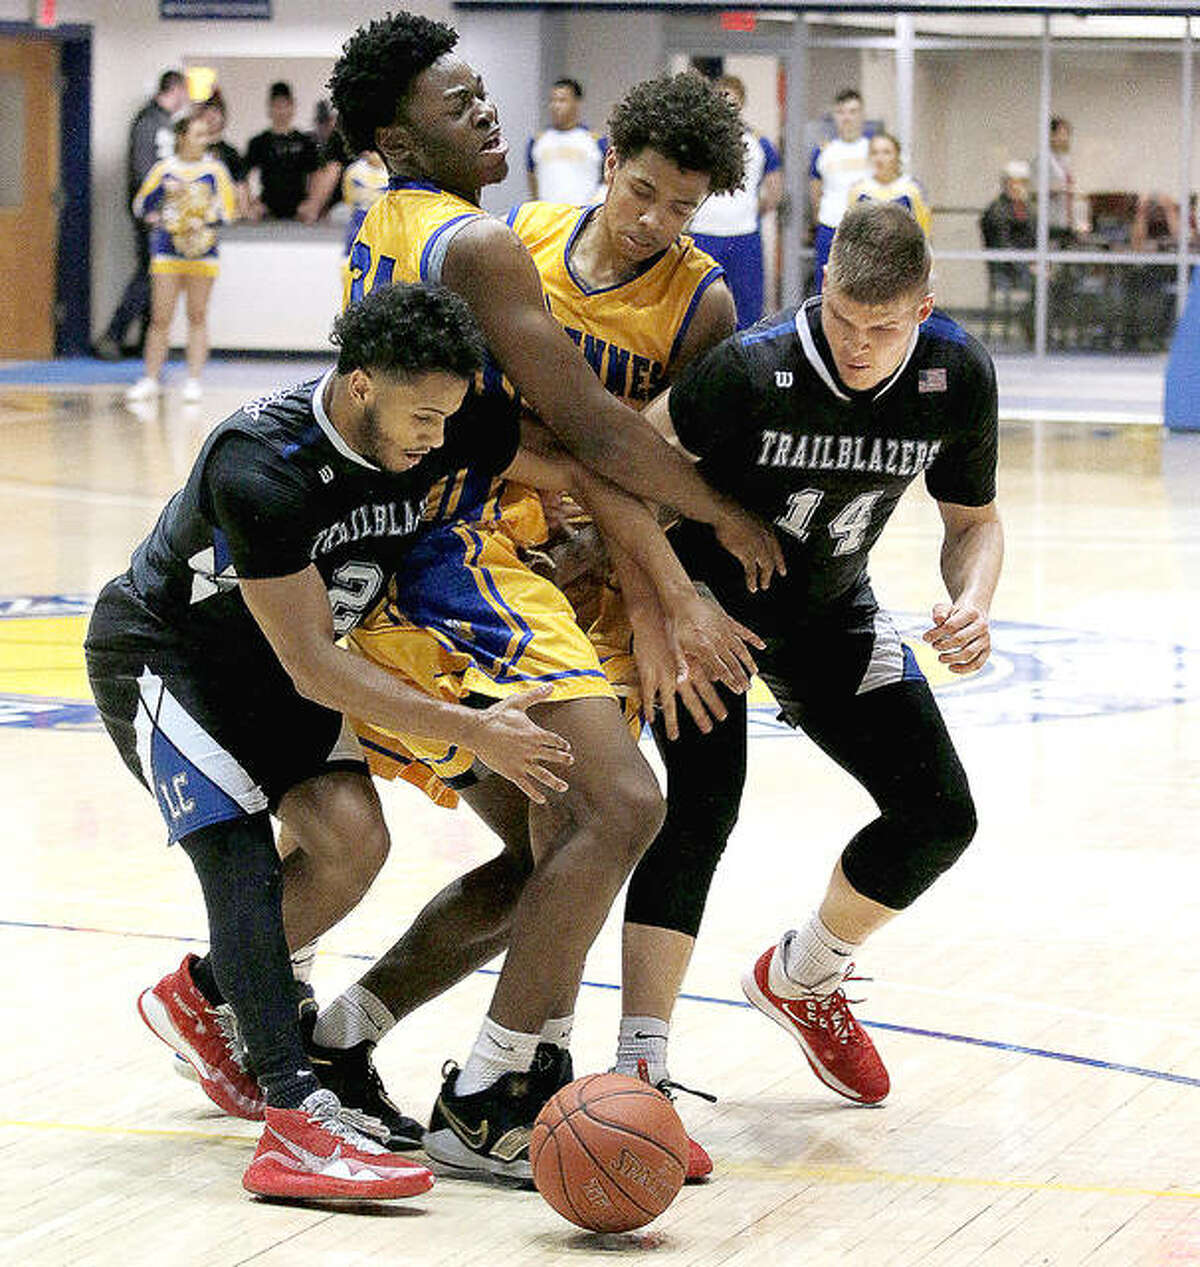 Vincennes University’s Chinedu Okanu and Craig Porter, middle, along with Lewis and Clark’s Ulysses Delayney, left, and Amandas Urkis (14) charge after a loose ball Monday night at Vincennes.